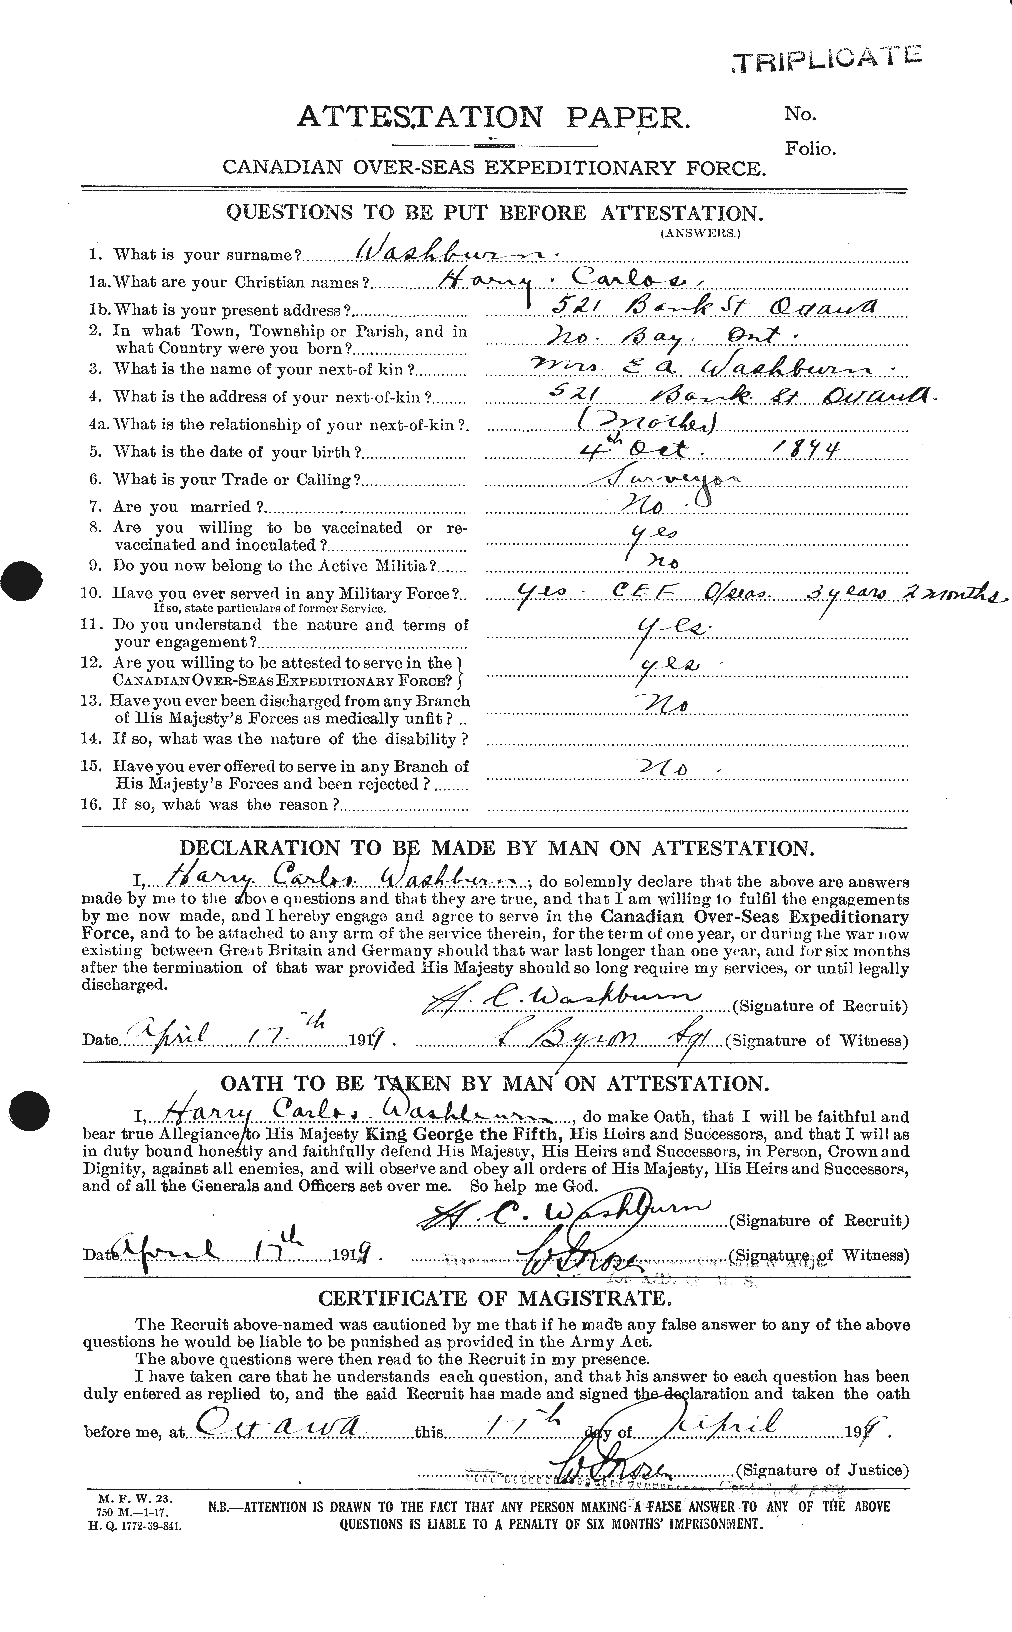 Personnel Records of the First World War - CEF 657065a